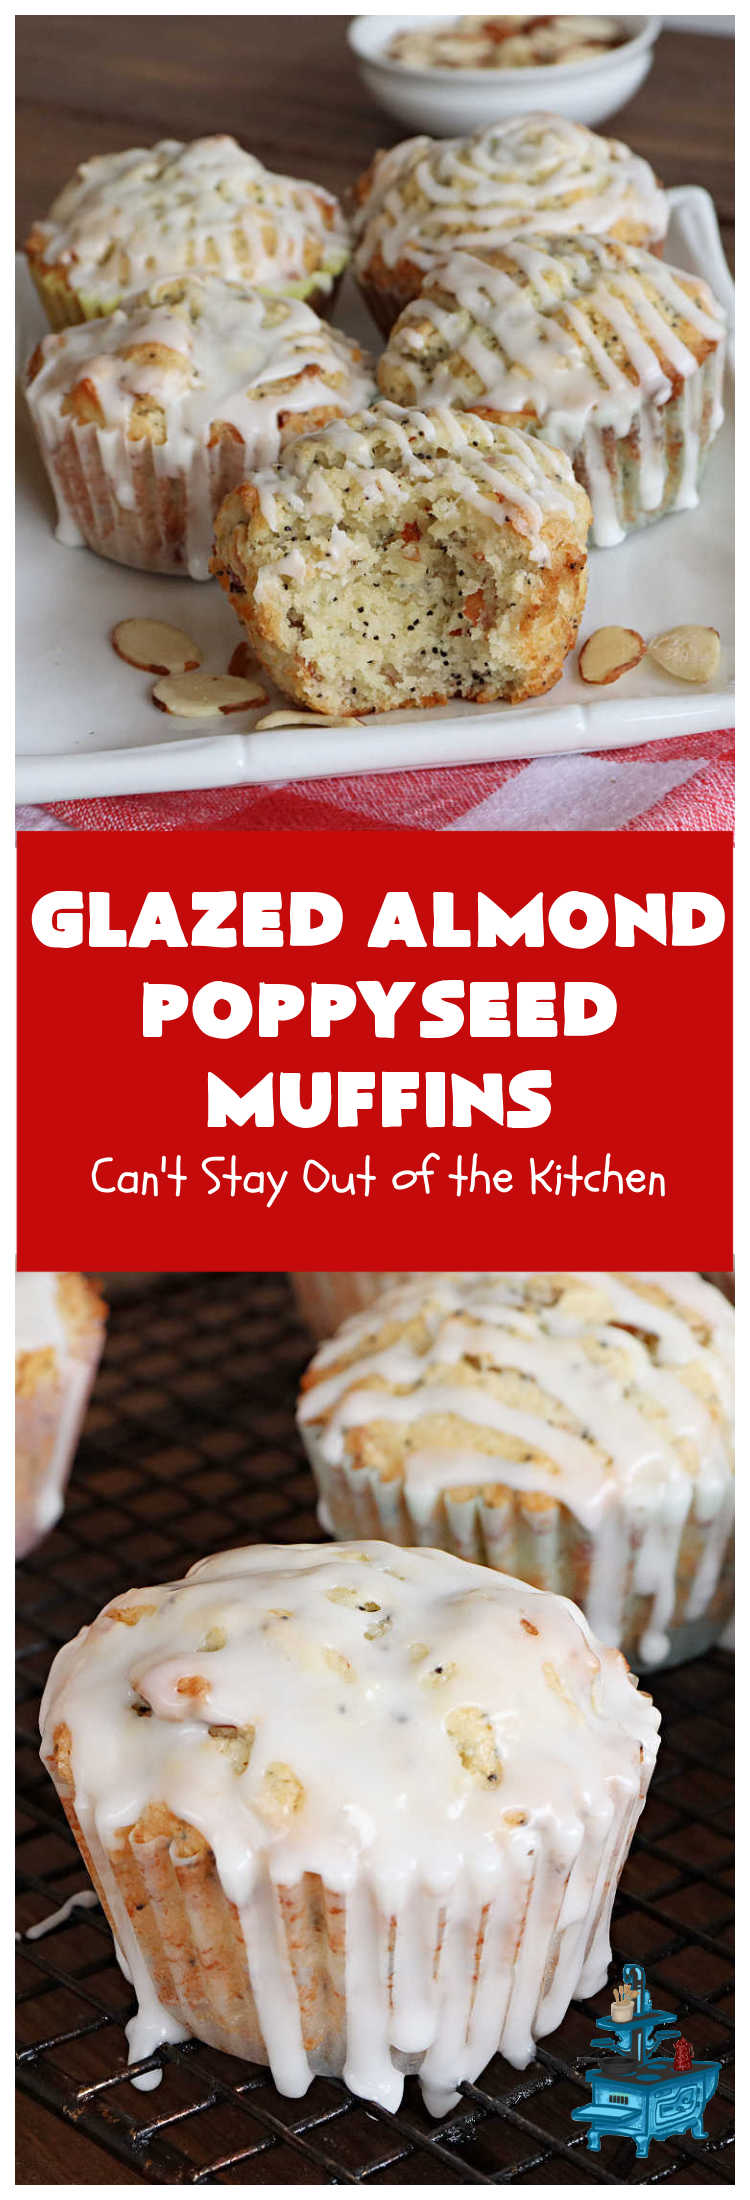 Glazed Almond Poppyseed Muffins | Can't Stay Out of the Kitchen | these fantastic #muffins just pop with #almond flavor. They're delightful to serve for a family, company or #holiday #breakfast. Every bite will have you swooning. #poppyseeds #GlazedAlmondPoppyseedMuffins